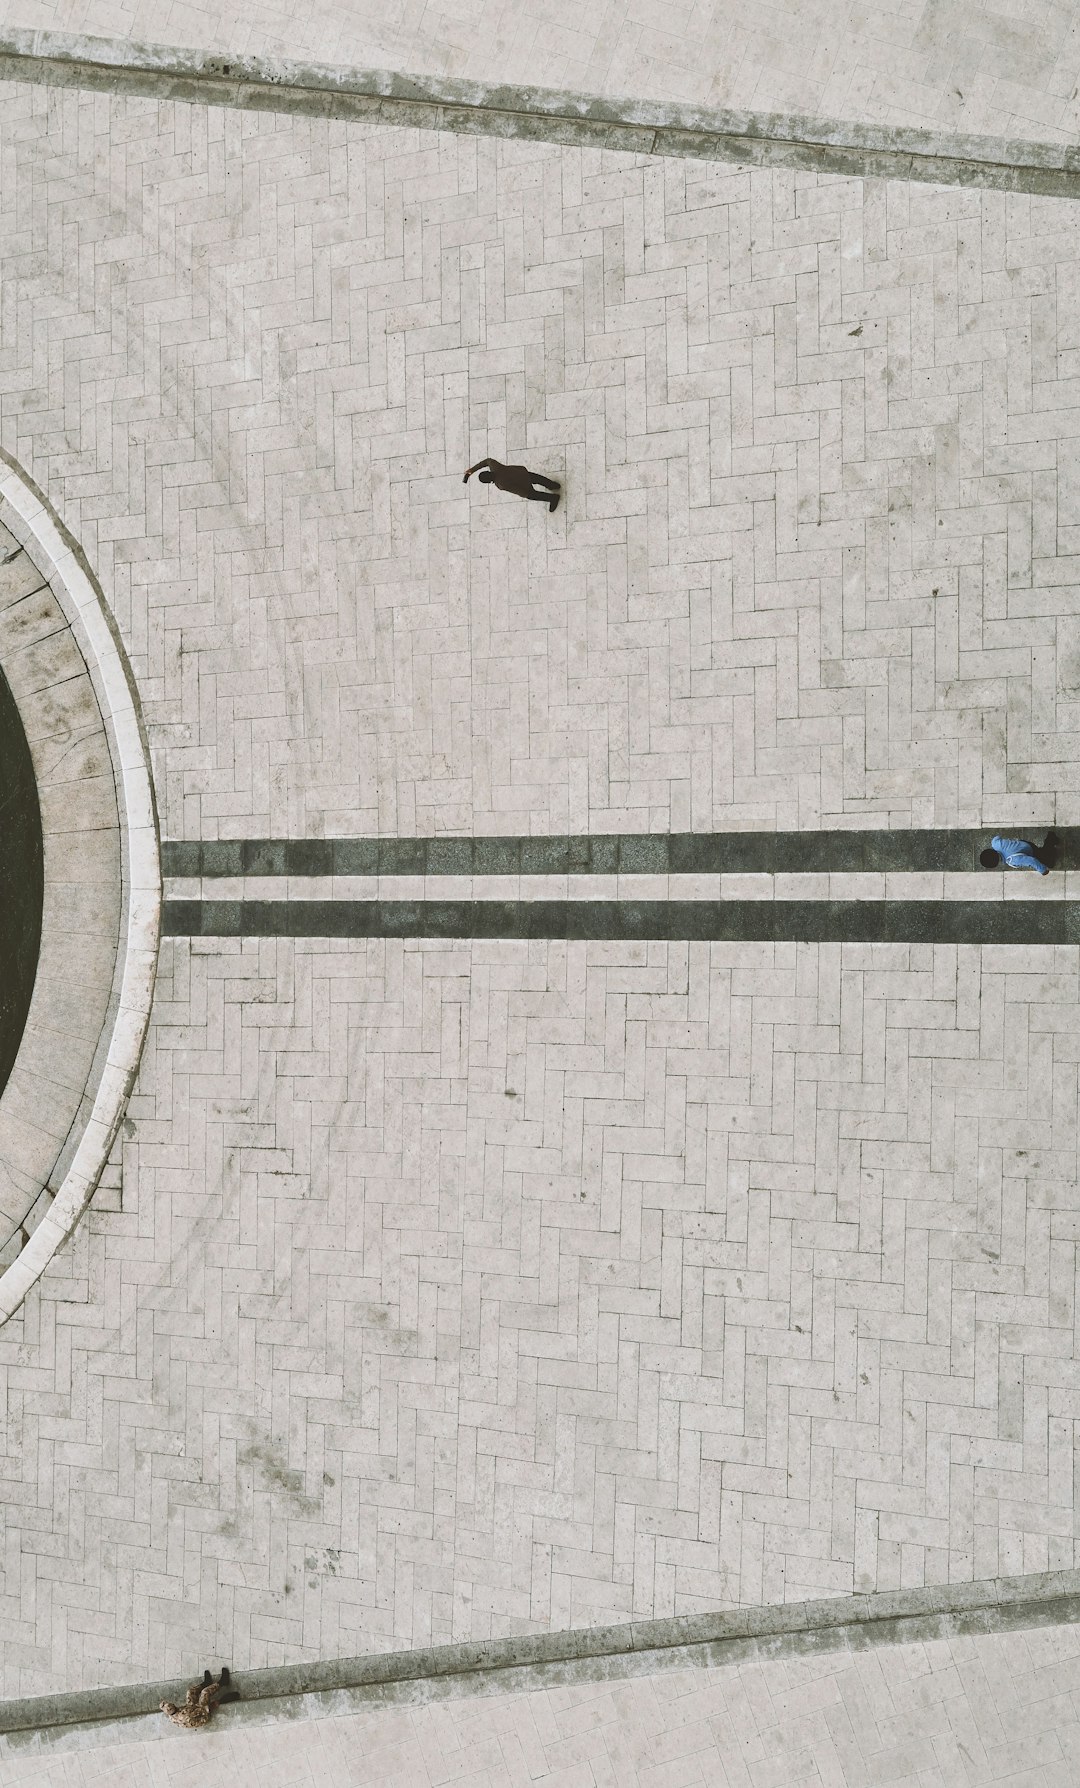 aerial view of people walking on gray concrete pavement